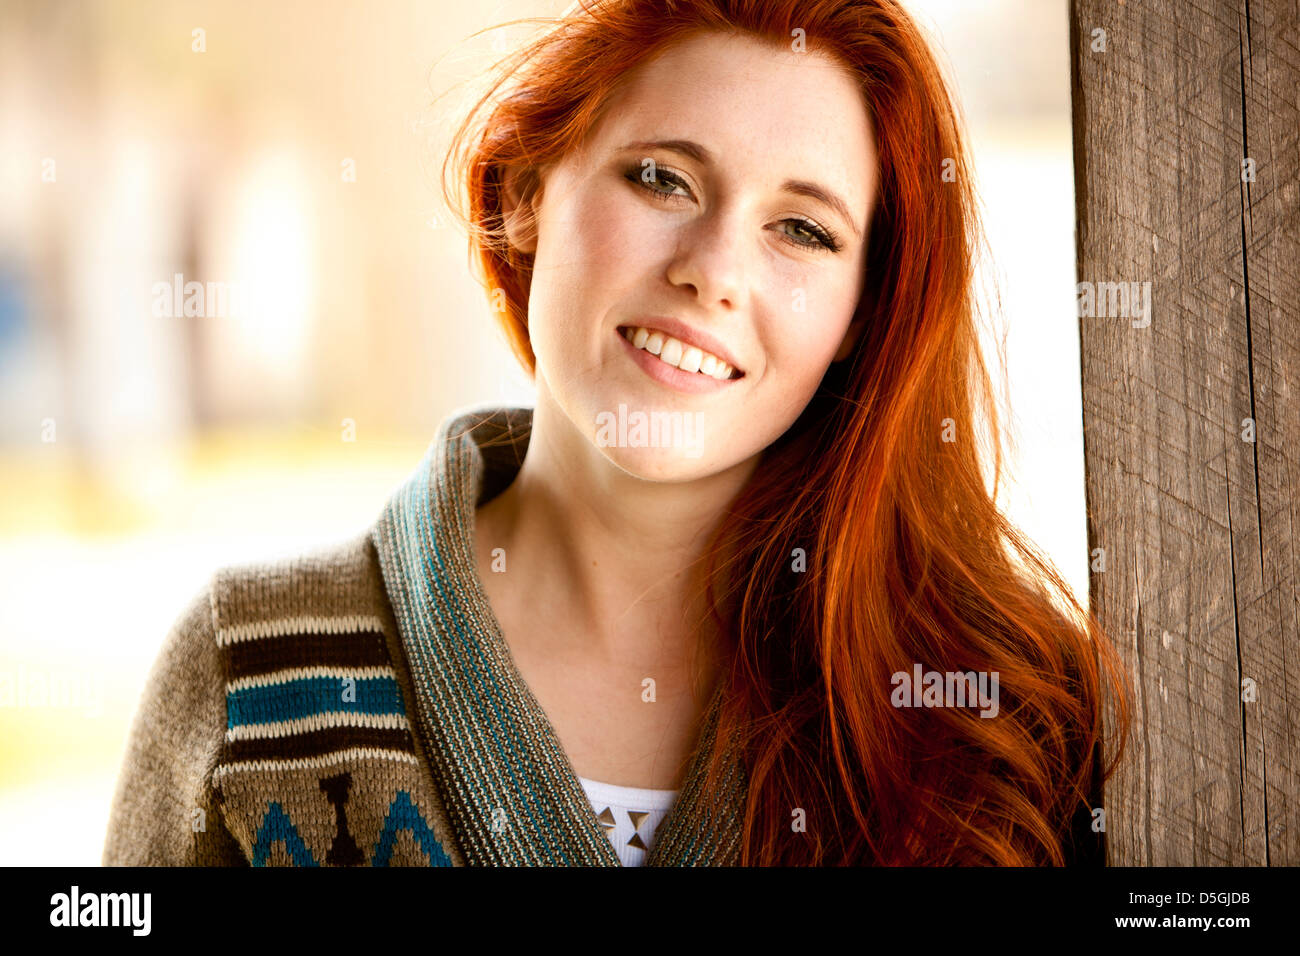 Red head woman standing outside in sunlight Stock Photo